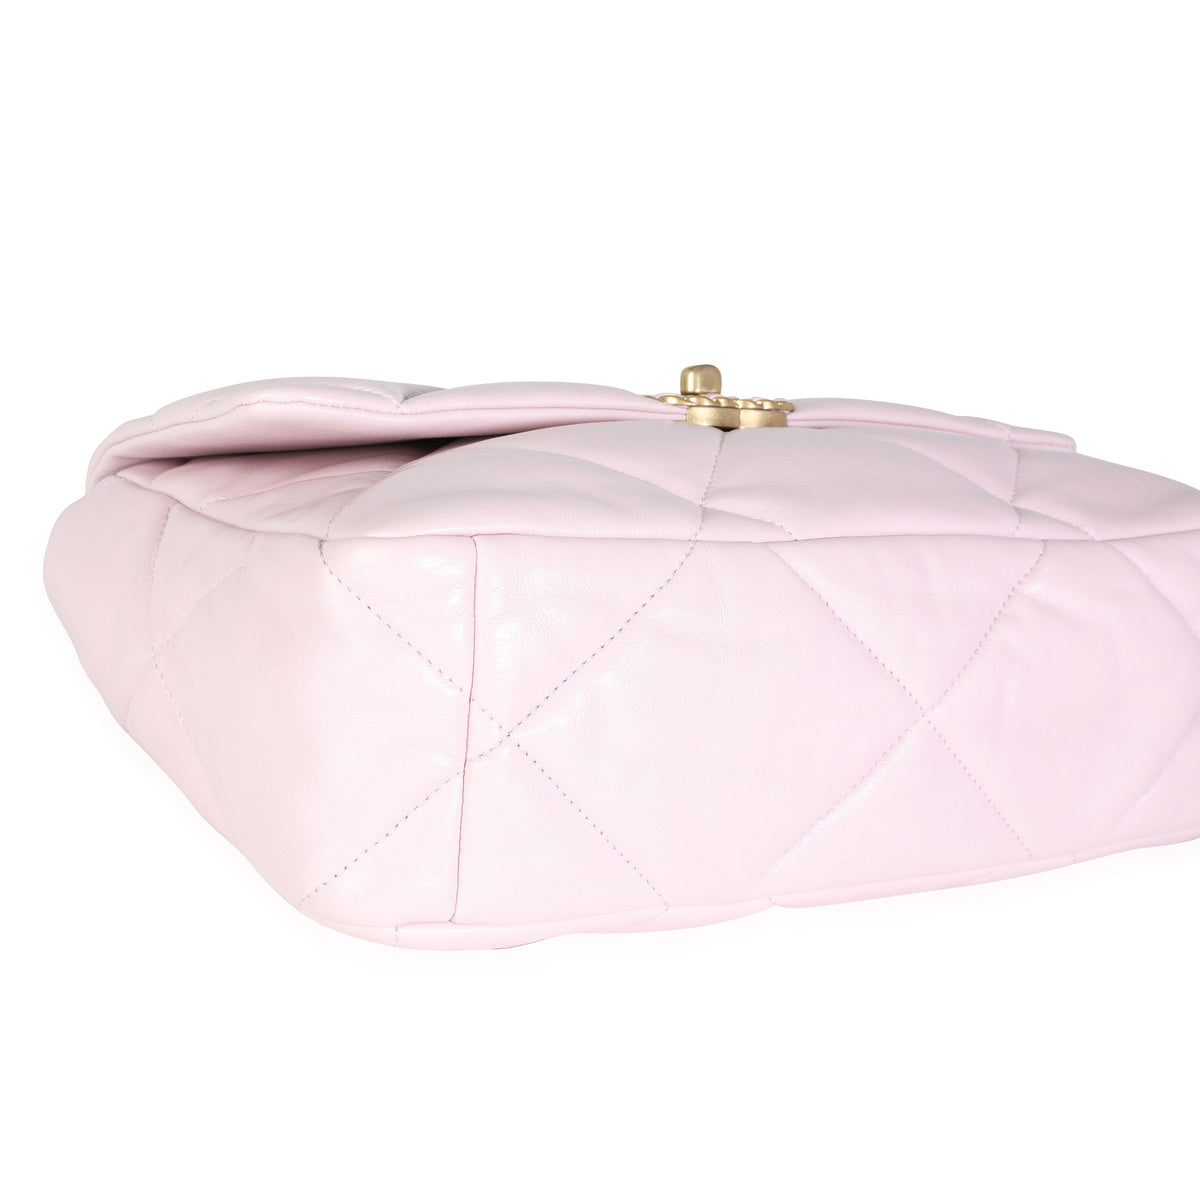 Chanel Light Pink Quilted Lambskin Large Chanel 19 Bag, myGemma